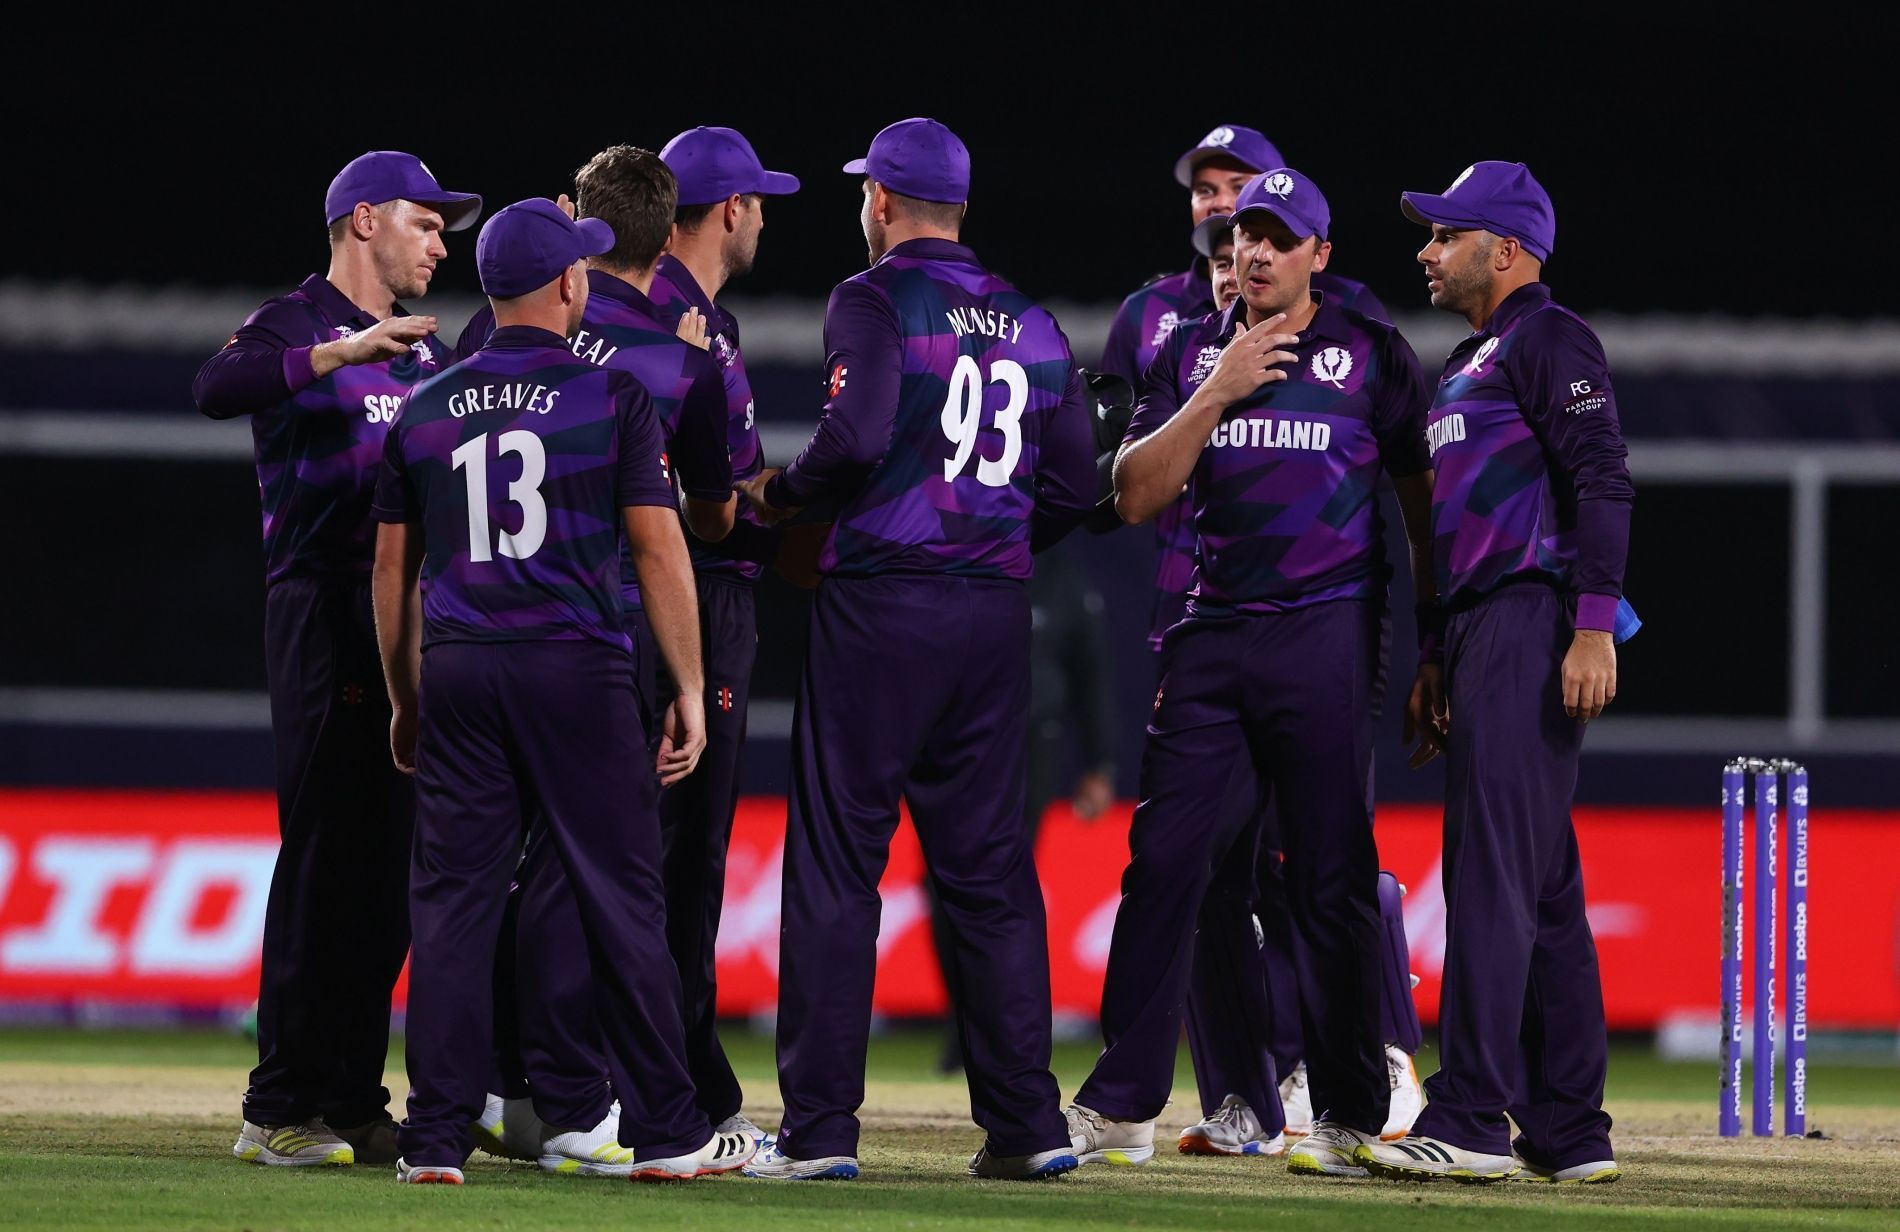 Scotland cricket team during the match against Bangladesh. Pic: T20WorldCup/ Twitter